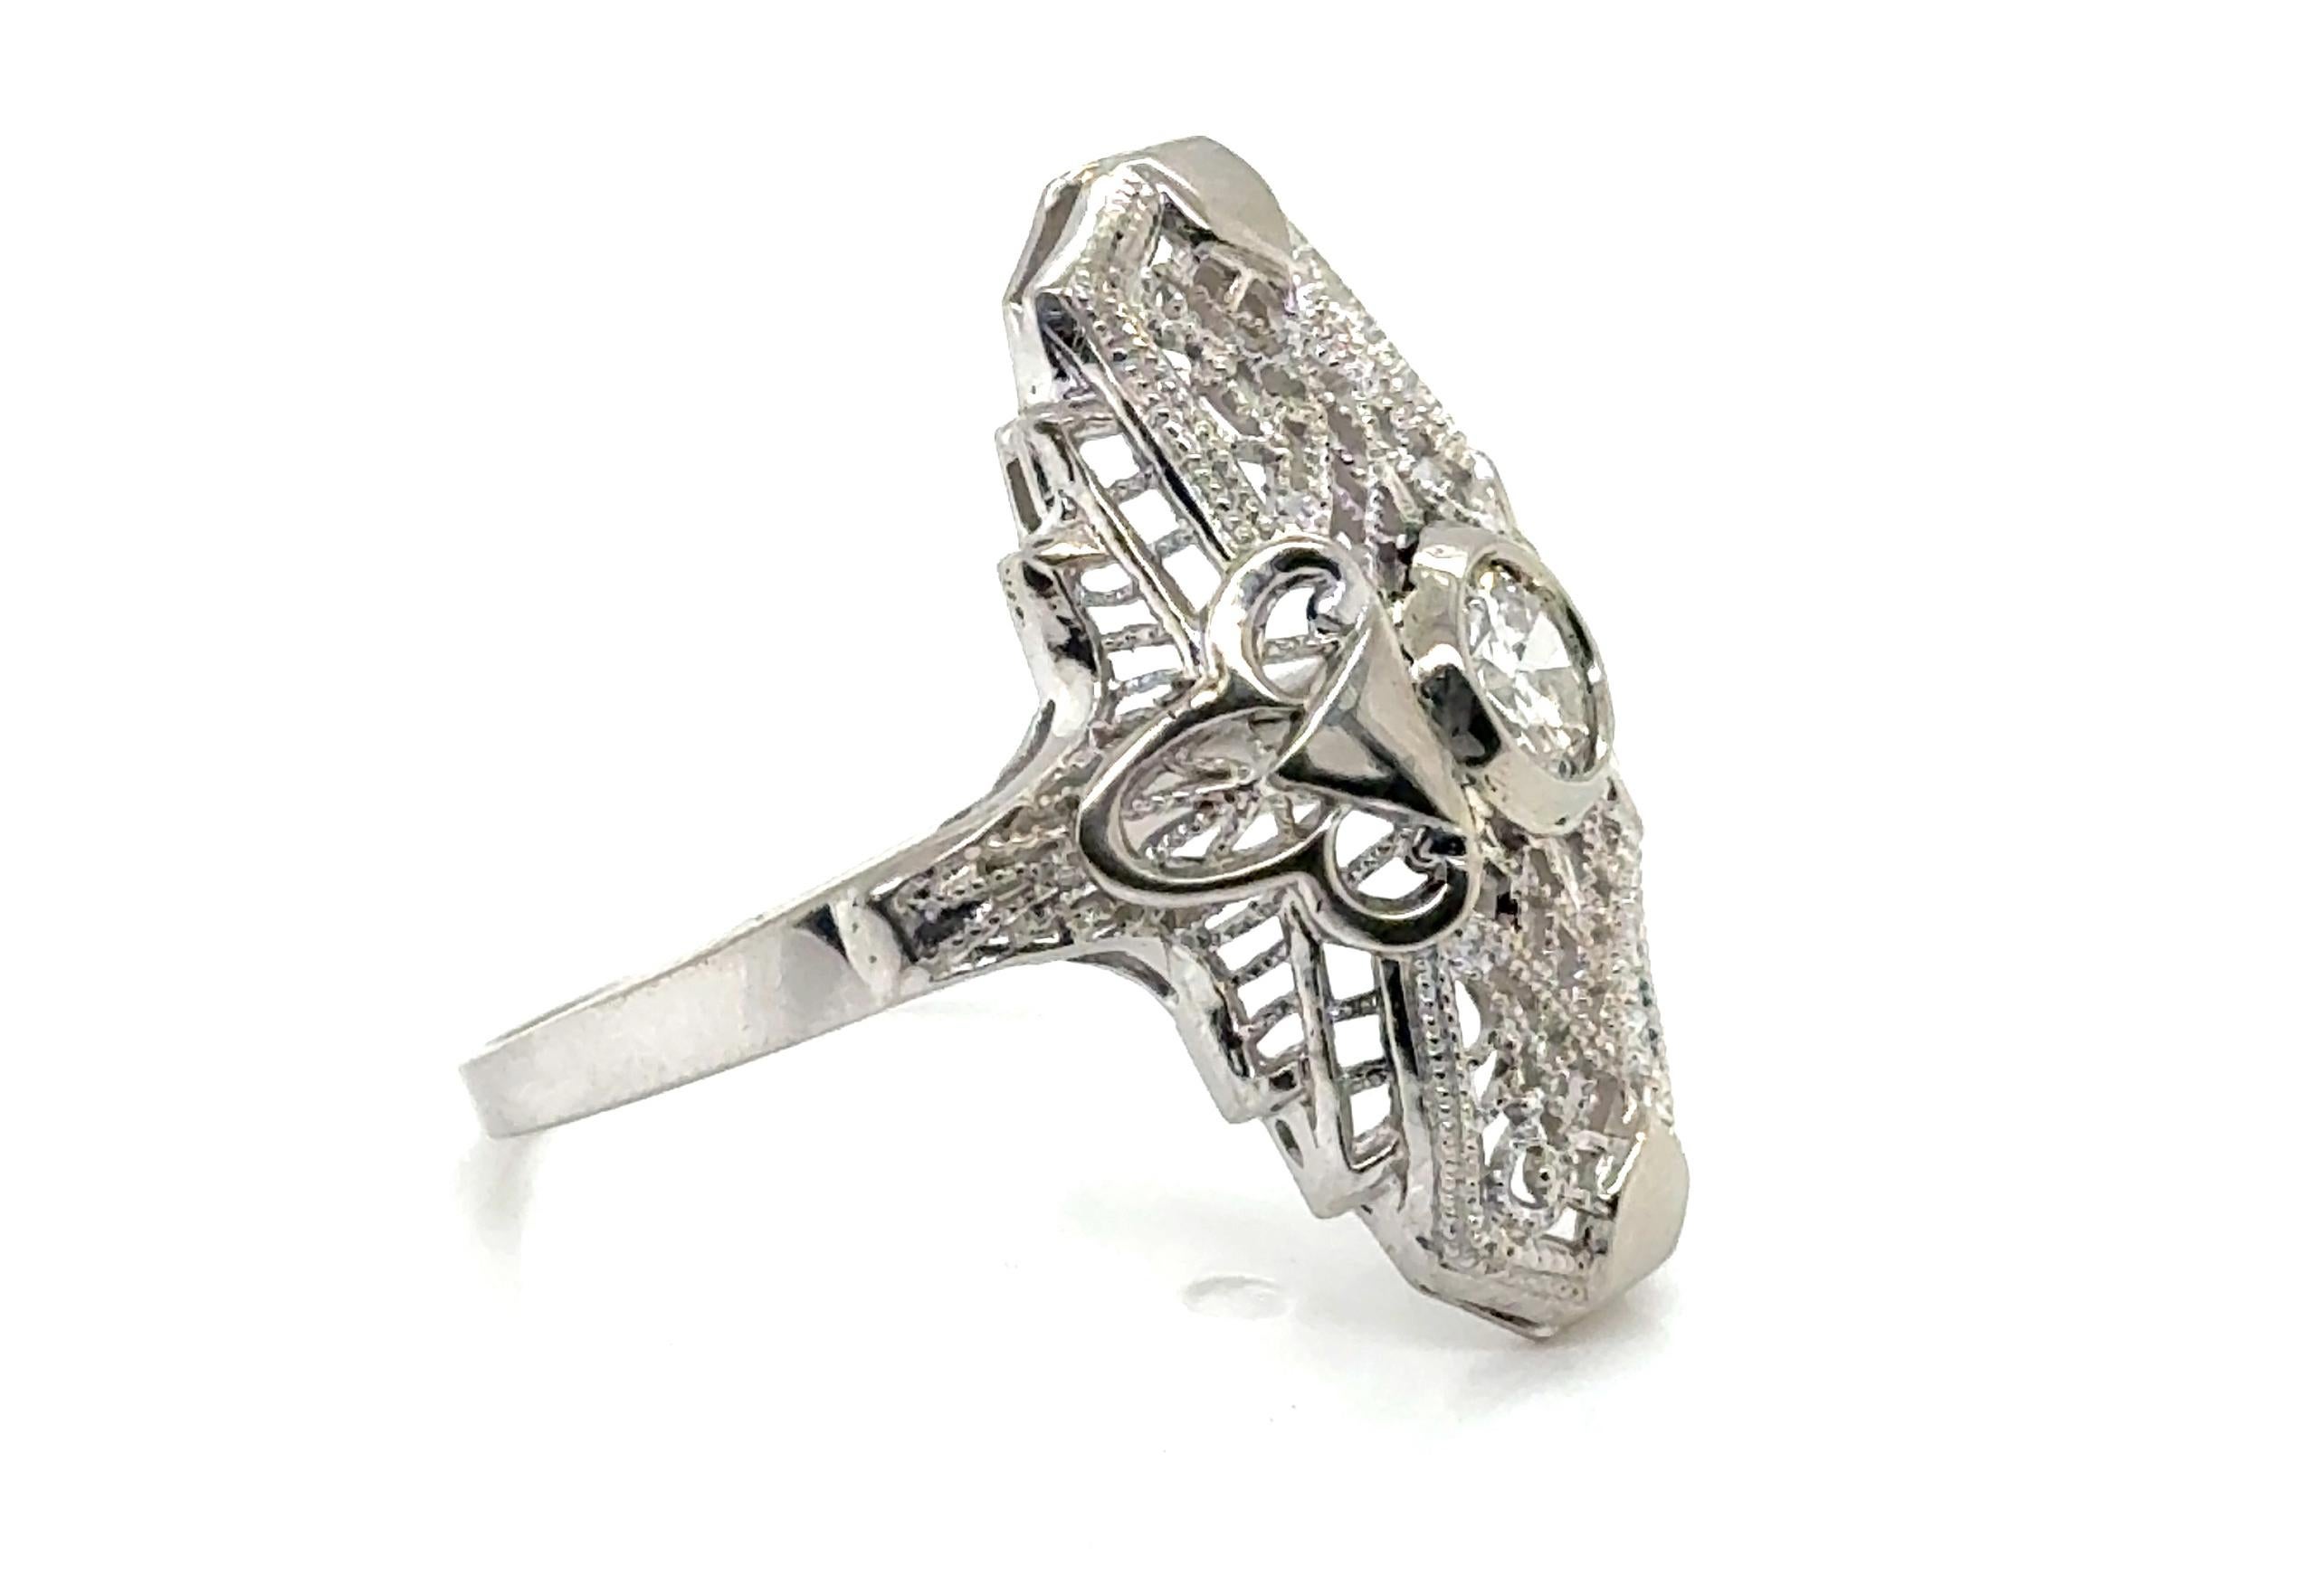 Genuine Original Antique from 1920s Diamond Filigree Cocktail Ring .31ct Antique Art Deco 14k


Centering on a Natural Mined .31 Carat Old European Cut Diamond Center

Accentuated with Fine Milgrain and Decorative Filigree Piercing  

Absolutely